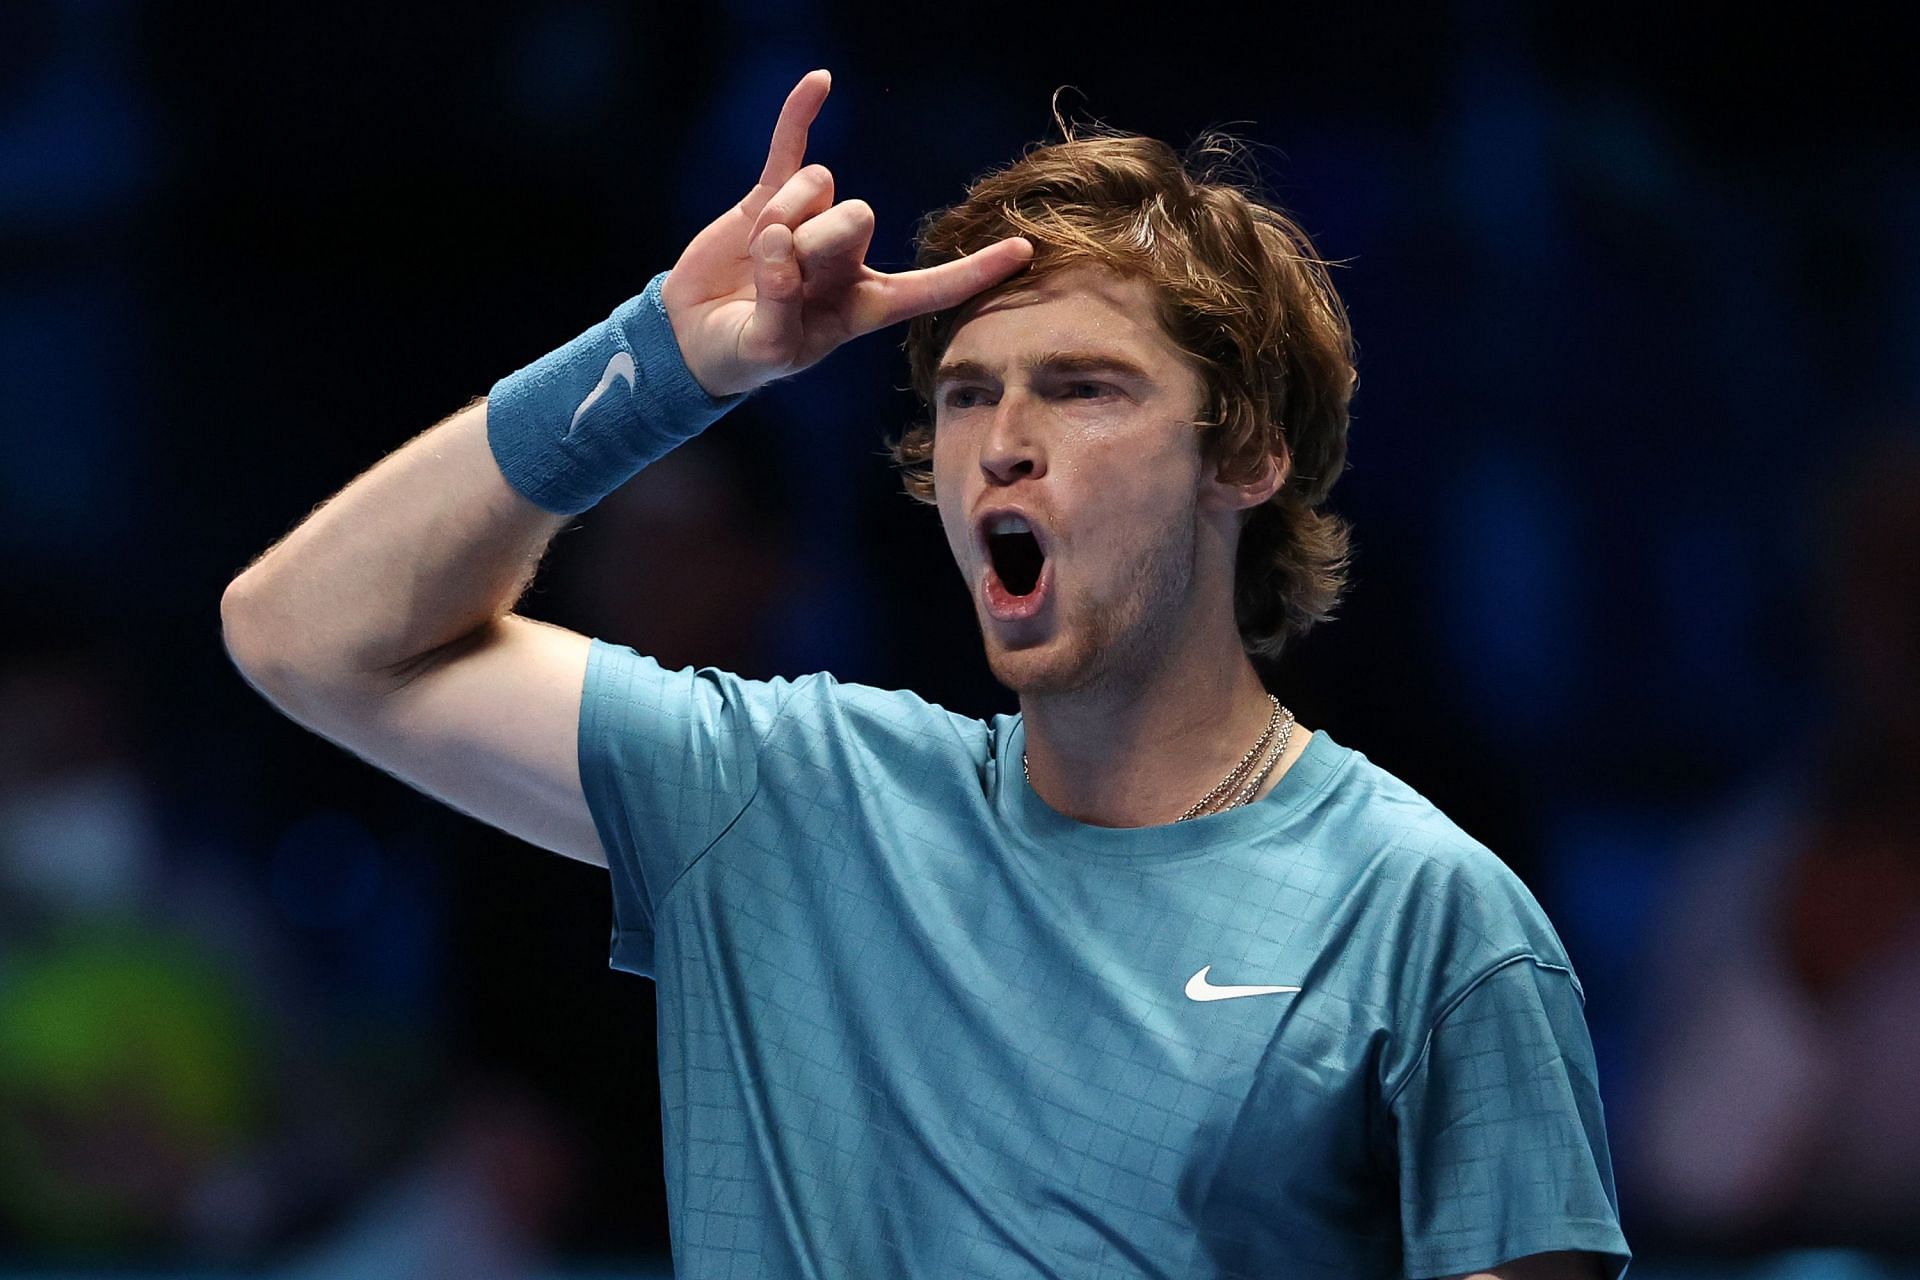 Andrey Rublev needs a win to ensure his place in the knockout stages.